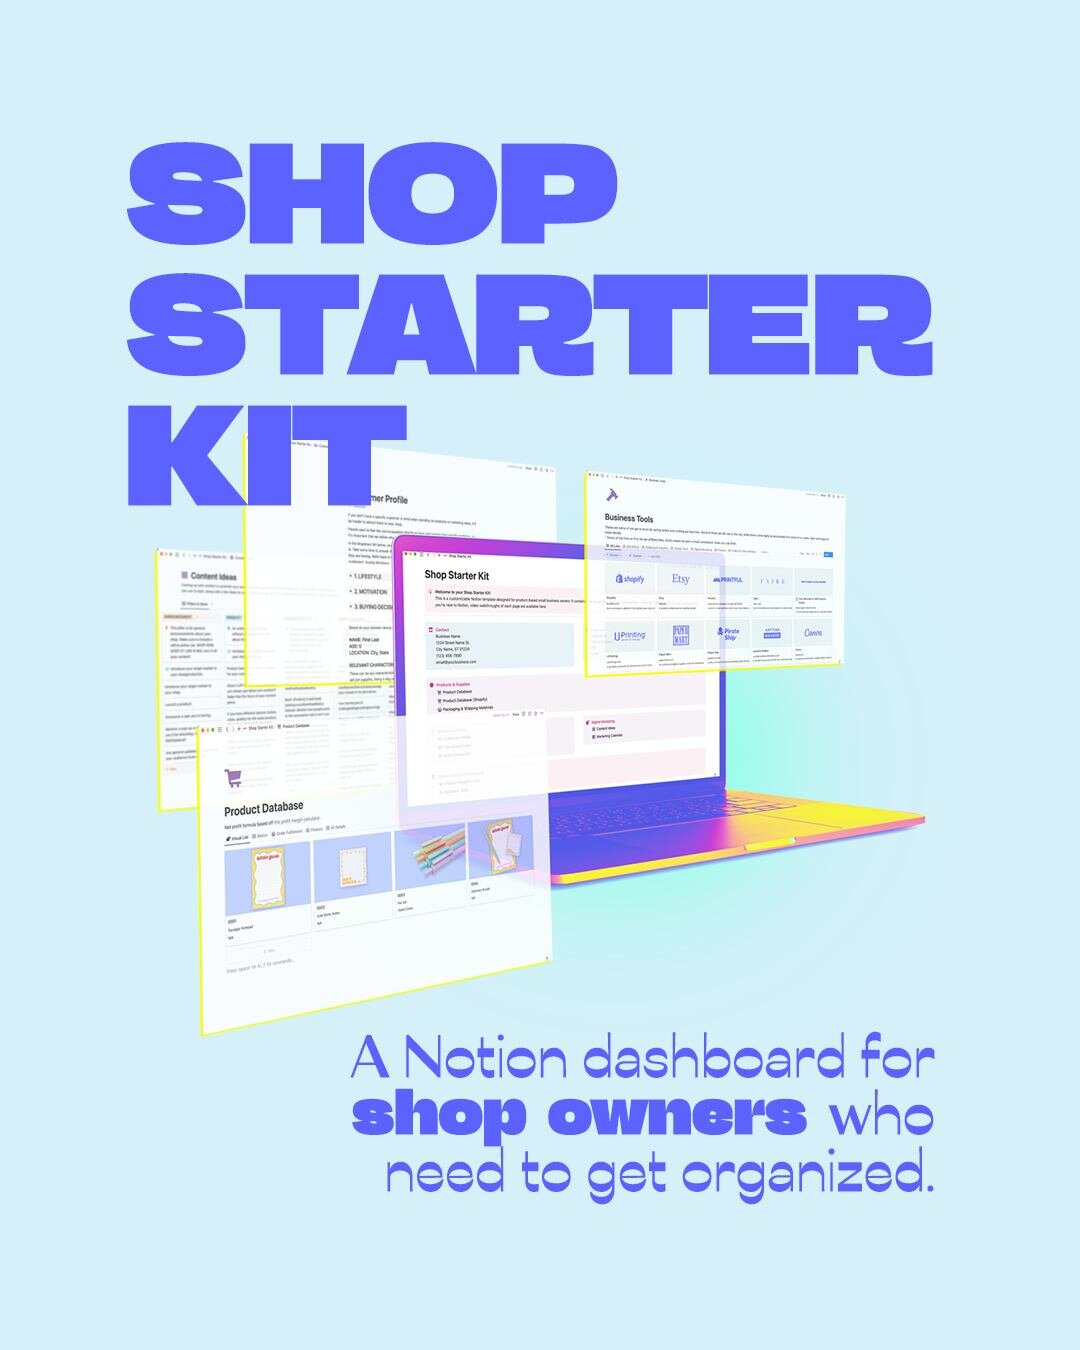 It's finally here! 🪩 The Notion dashboard that takes shop owners from hot mess jefas to confident CEOs.

A lil note from Reyna about it:
&ldquo;I've been running ecommerce shops and a graphic design business for a few years, but keeping on top of th